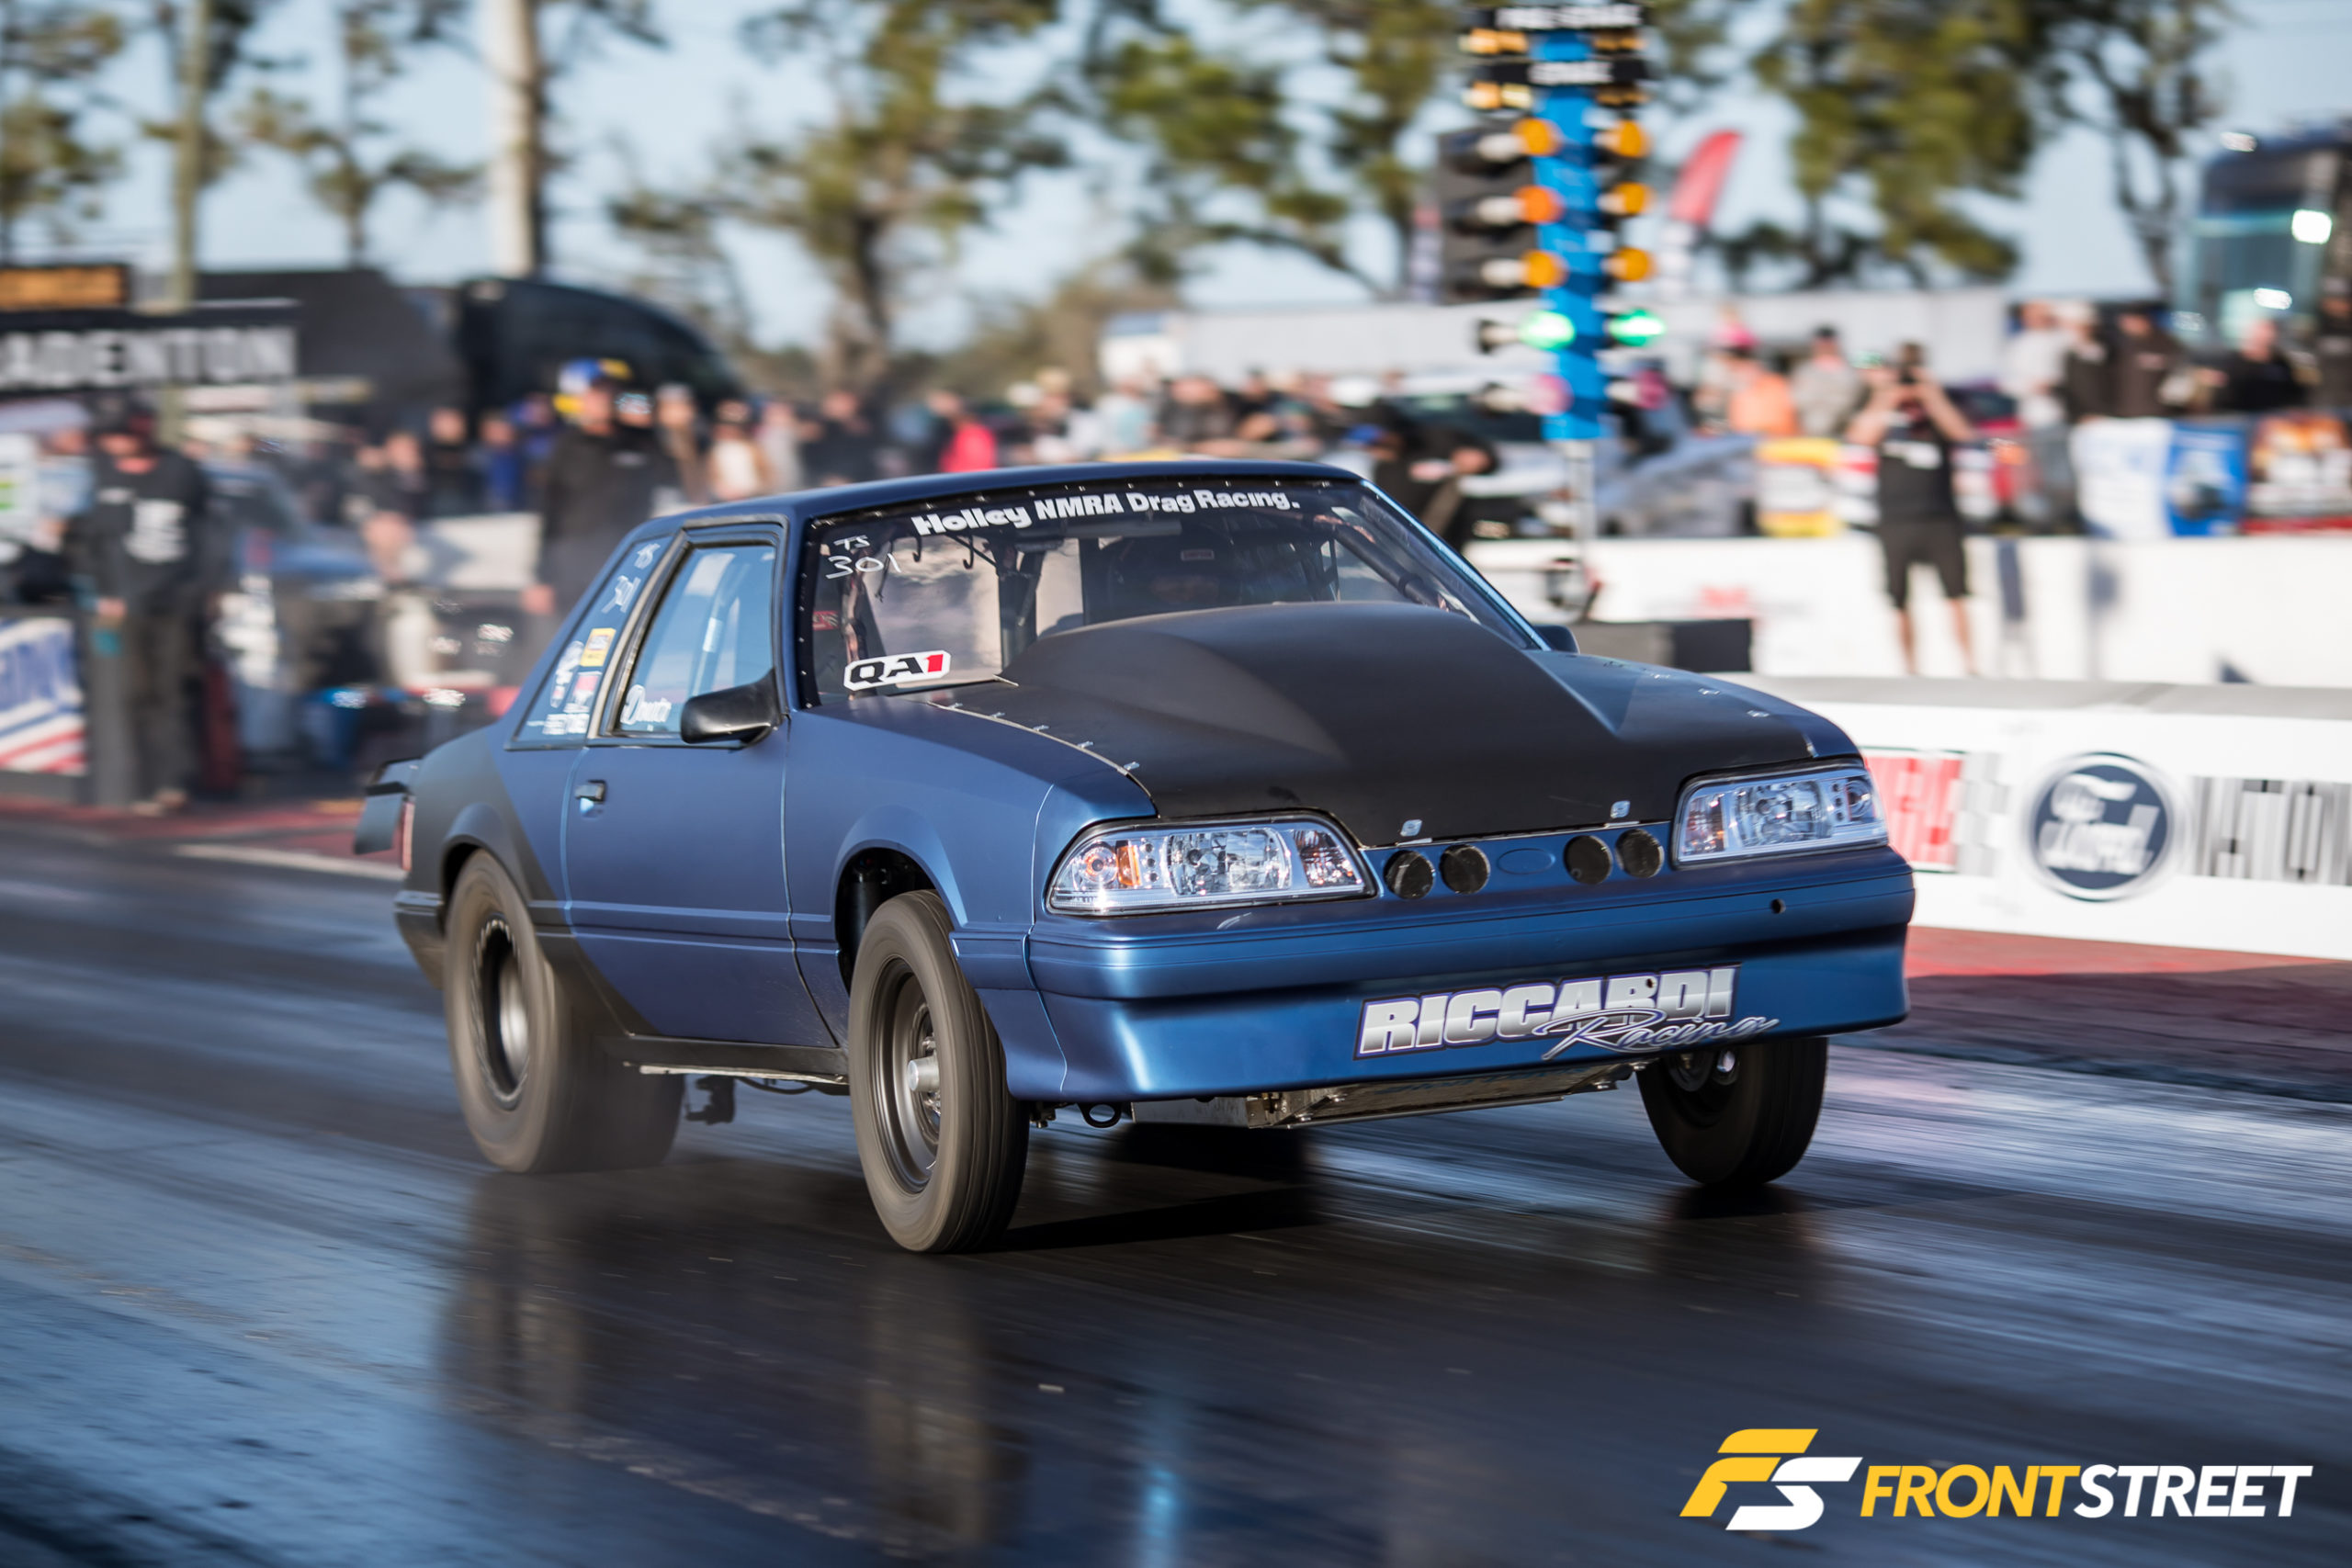 The NMRA's Spring Break Shootout Features Ford Performance In Florida